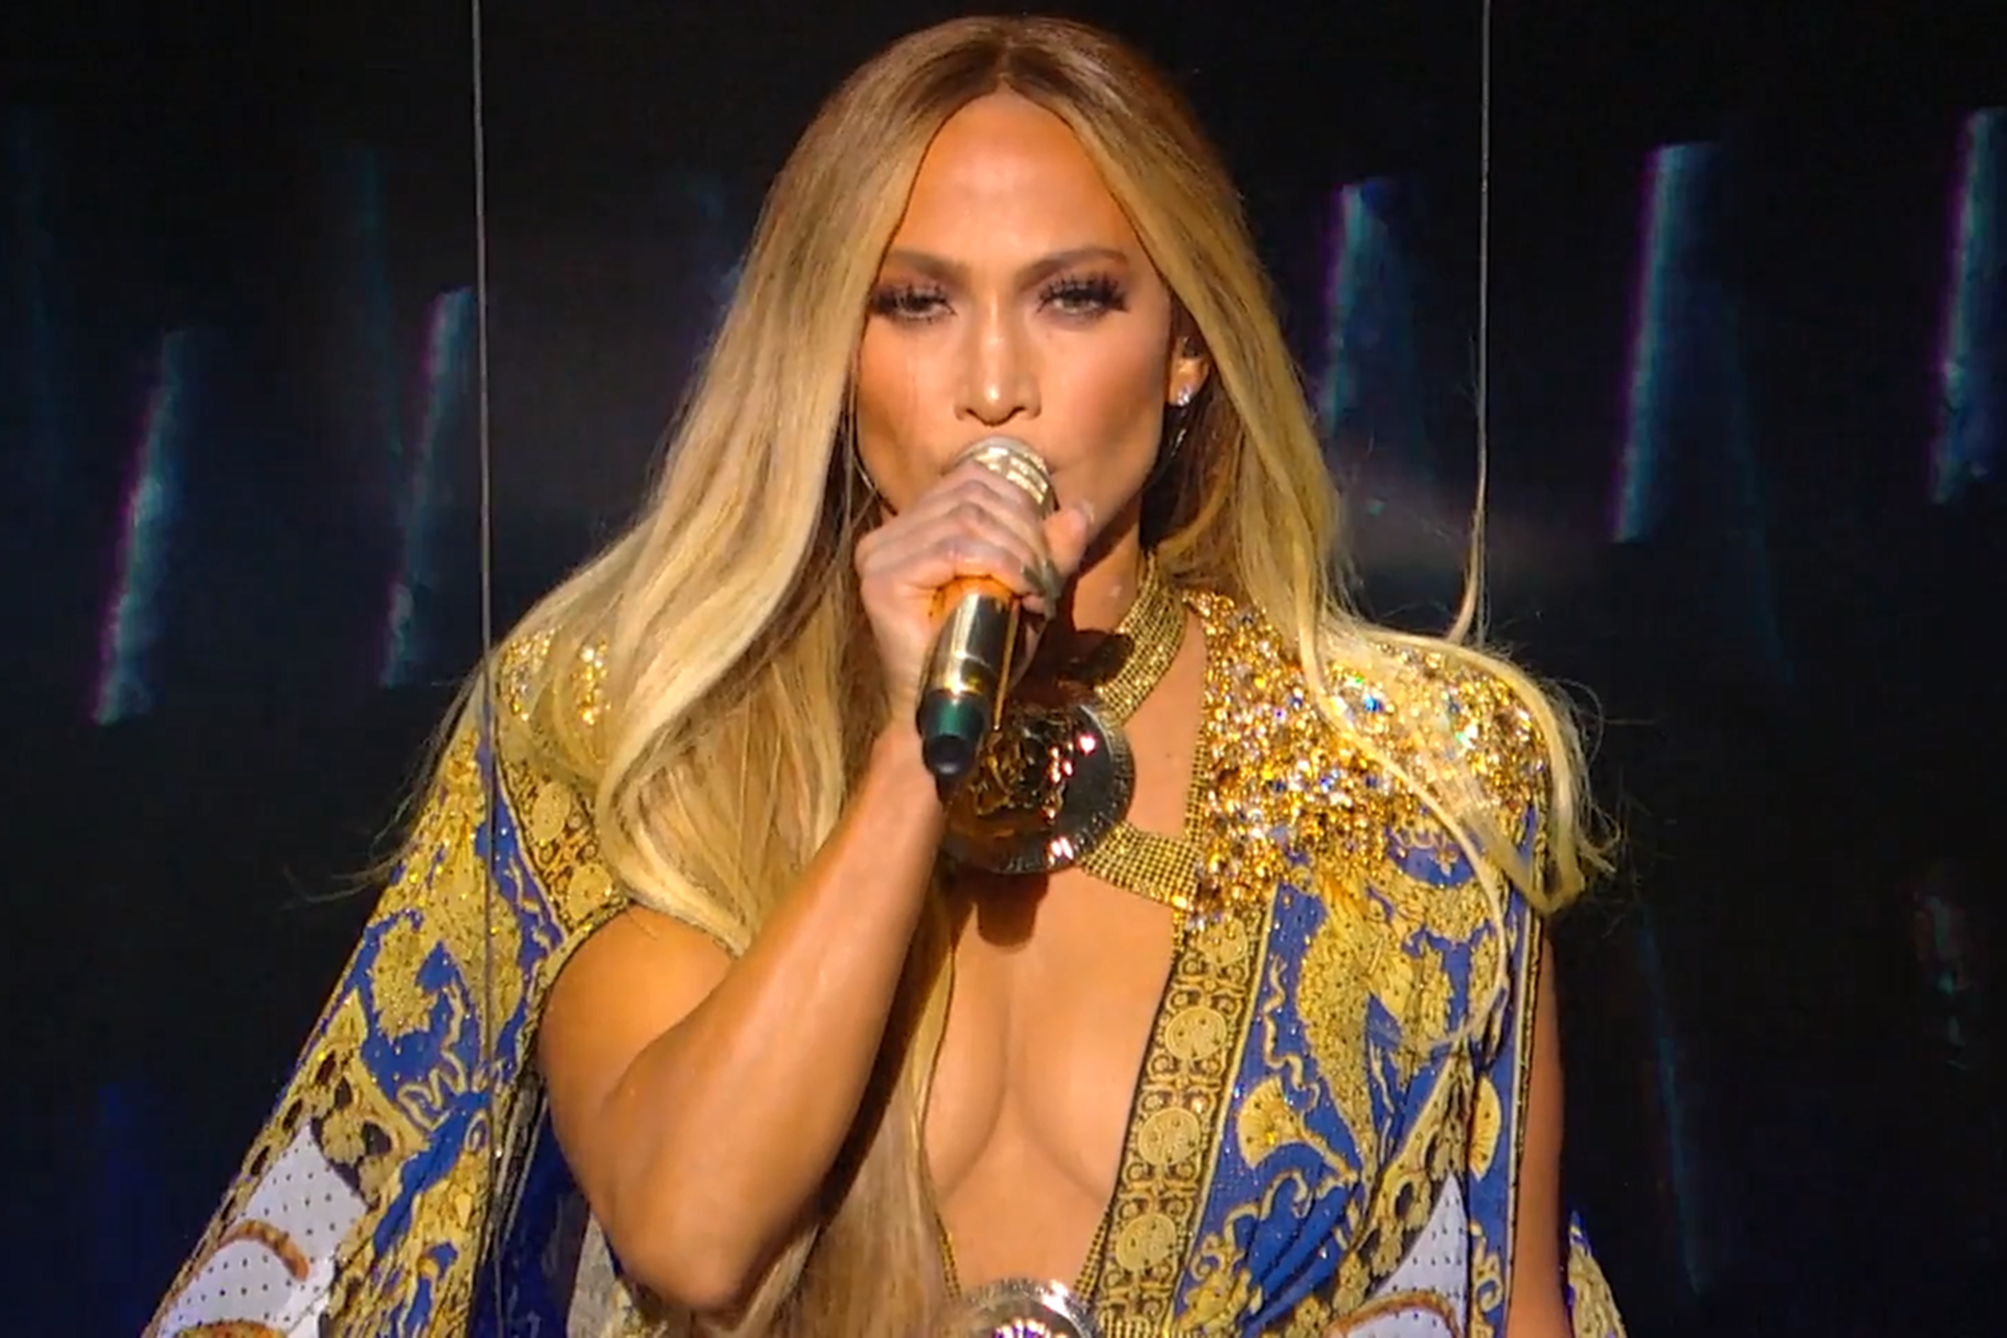 JLo Has A New Song Coming Out & Stripped Down For The Cover Out